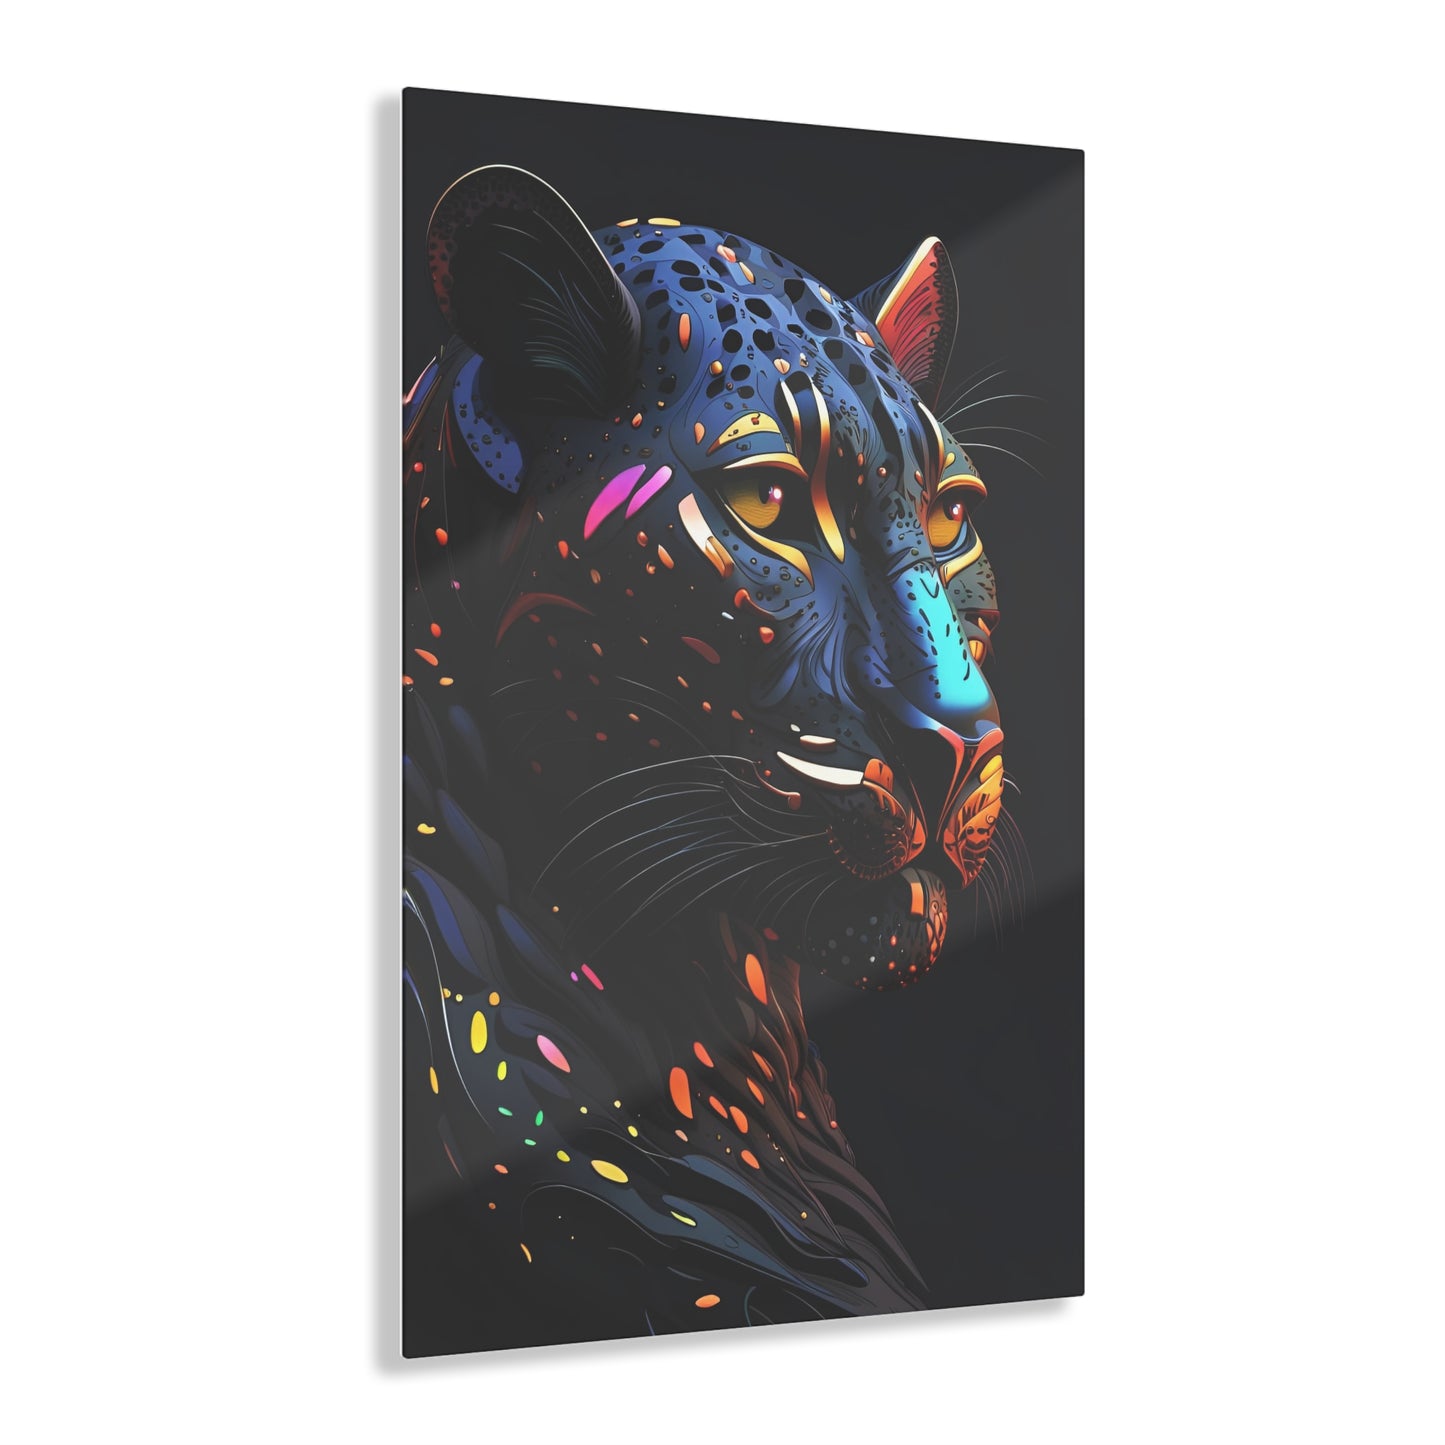 Big Cat Lover Art - Stylized Colorful Black Panther Head printed on a crystal clear acrylic panel